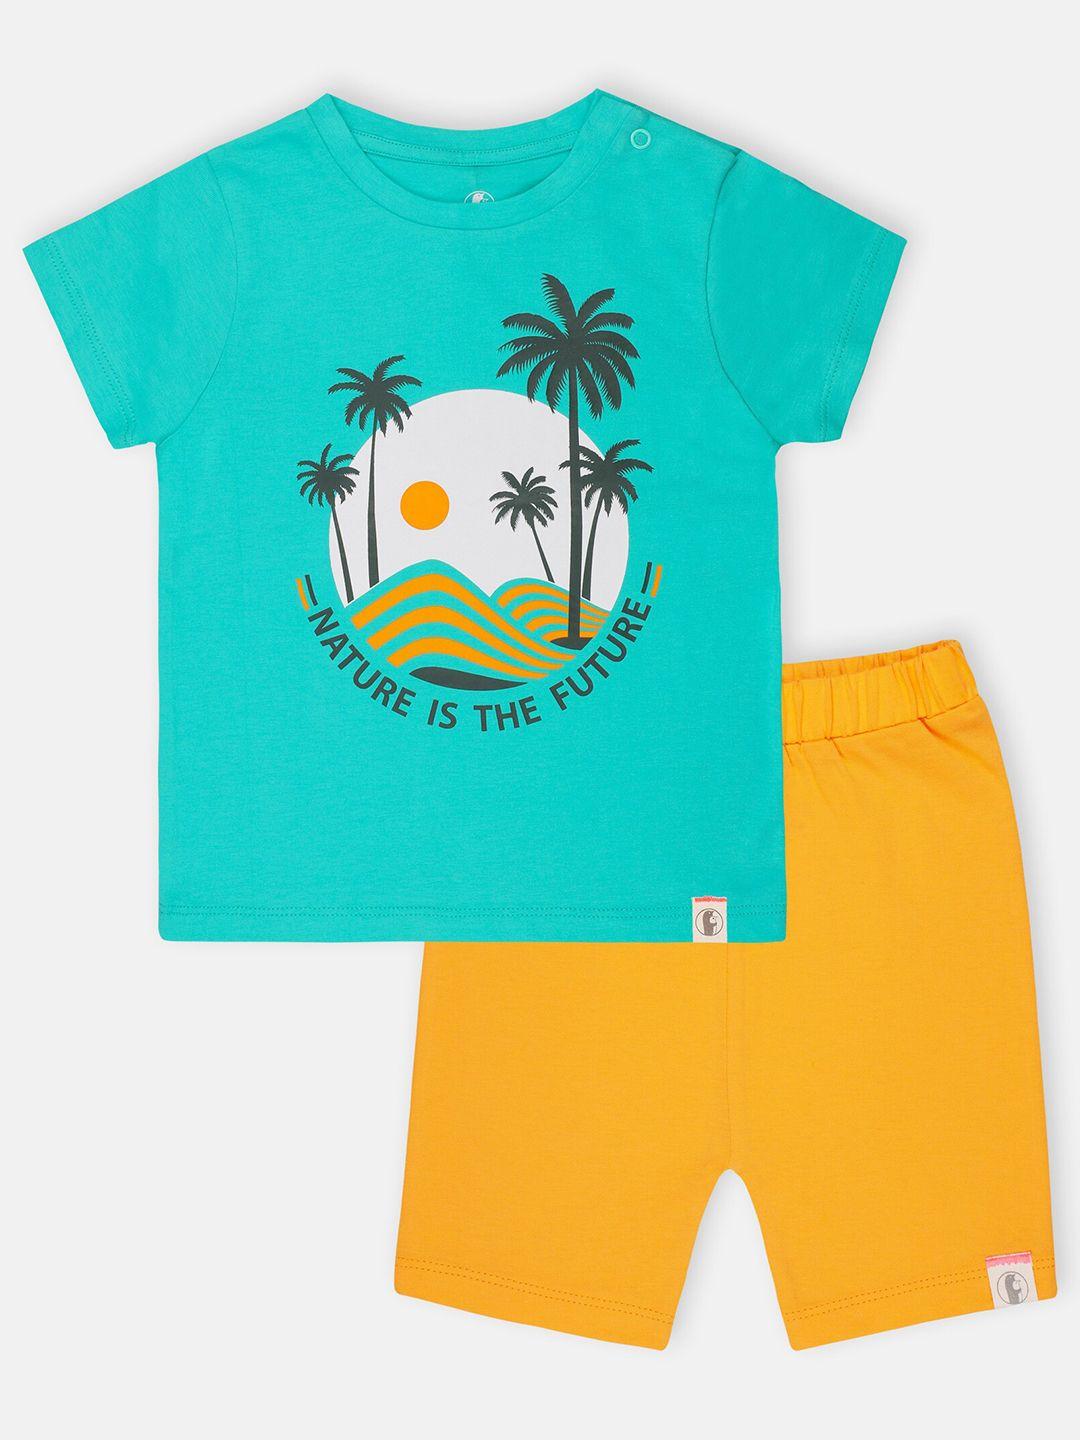 babysafe-boys-teal-blue-&-yellow-printed-pure-cotton-t-shirt-with-shorts